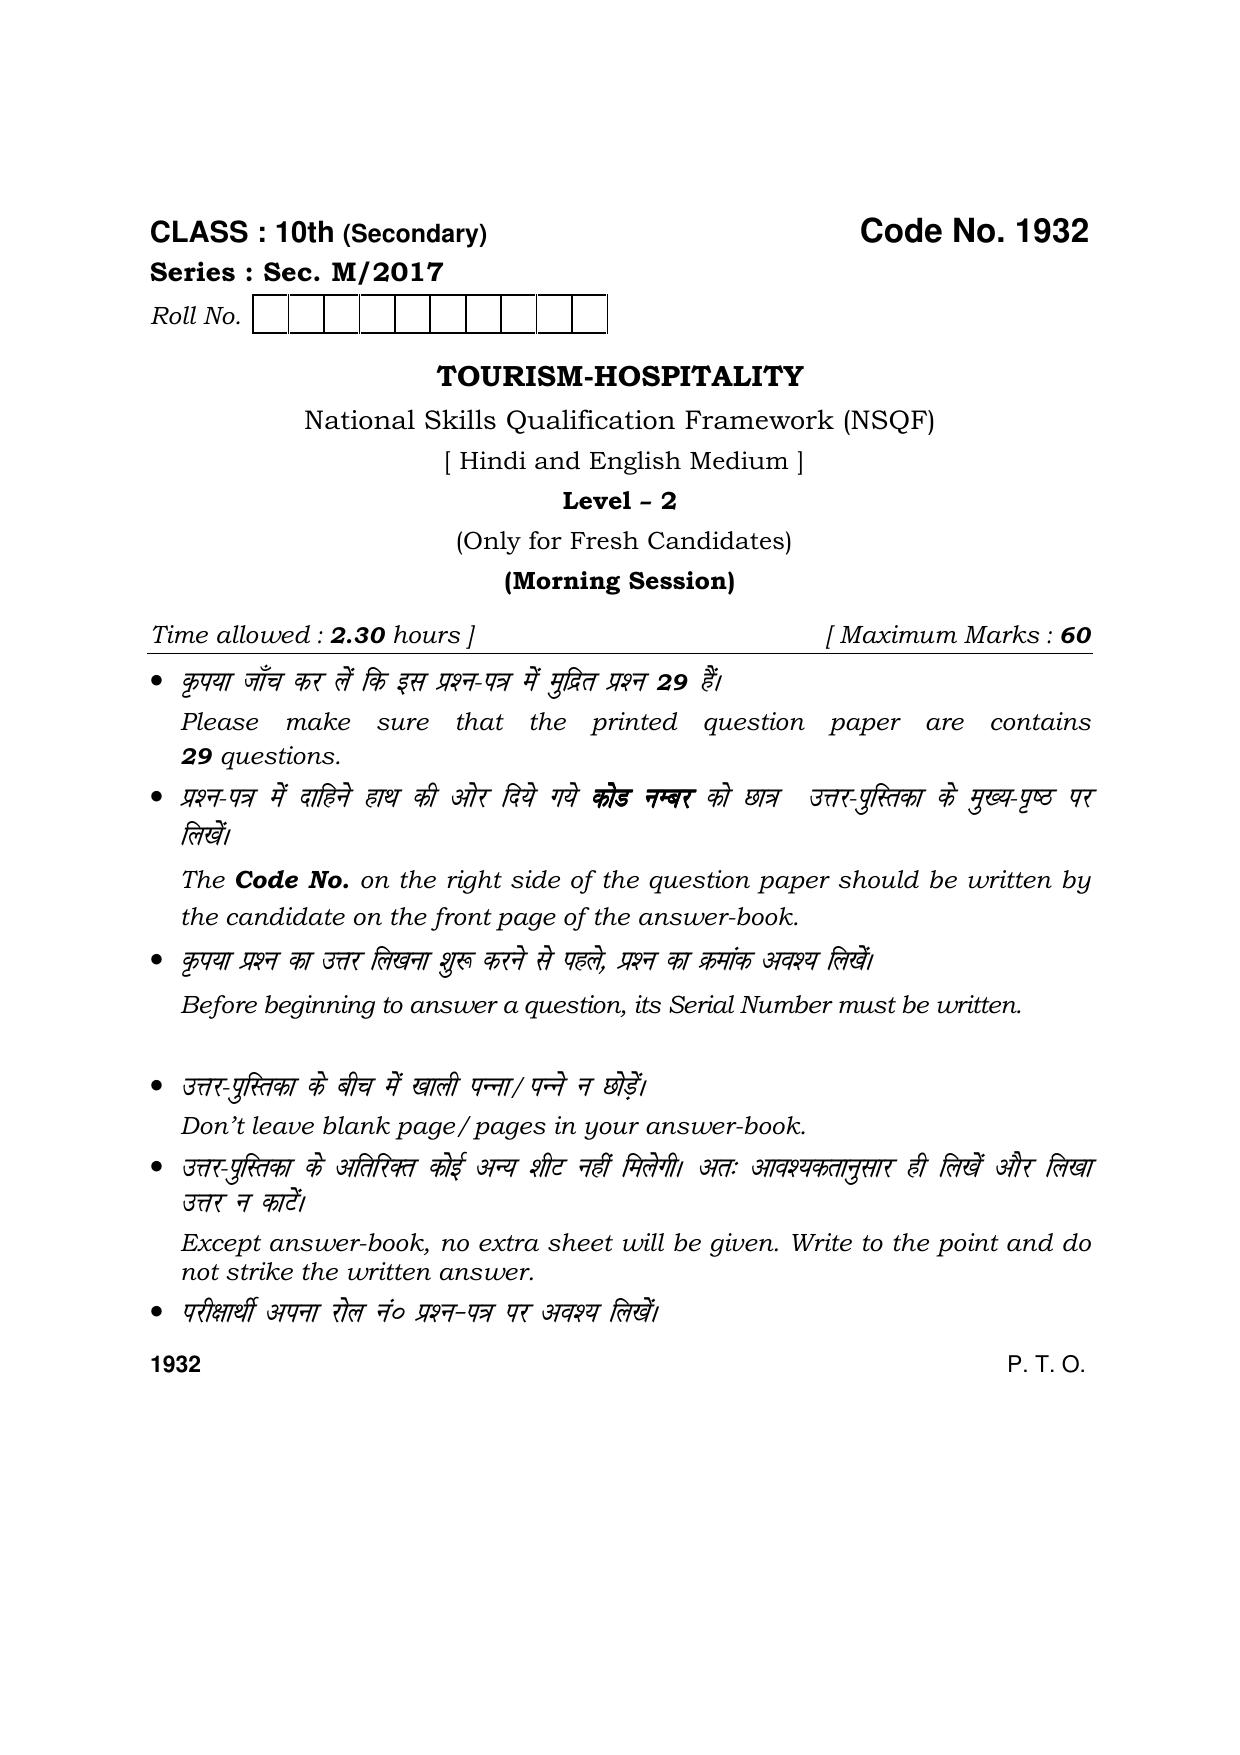 Haryana Board HBSE Class 10 Toursim and Hospitality 2017 Question Paper - Page 1